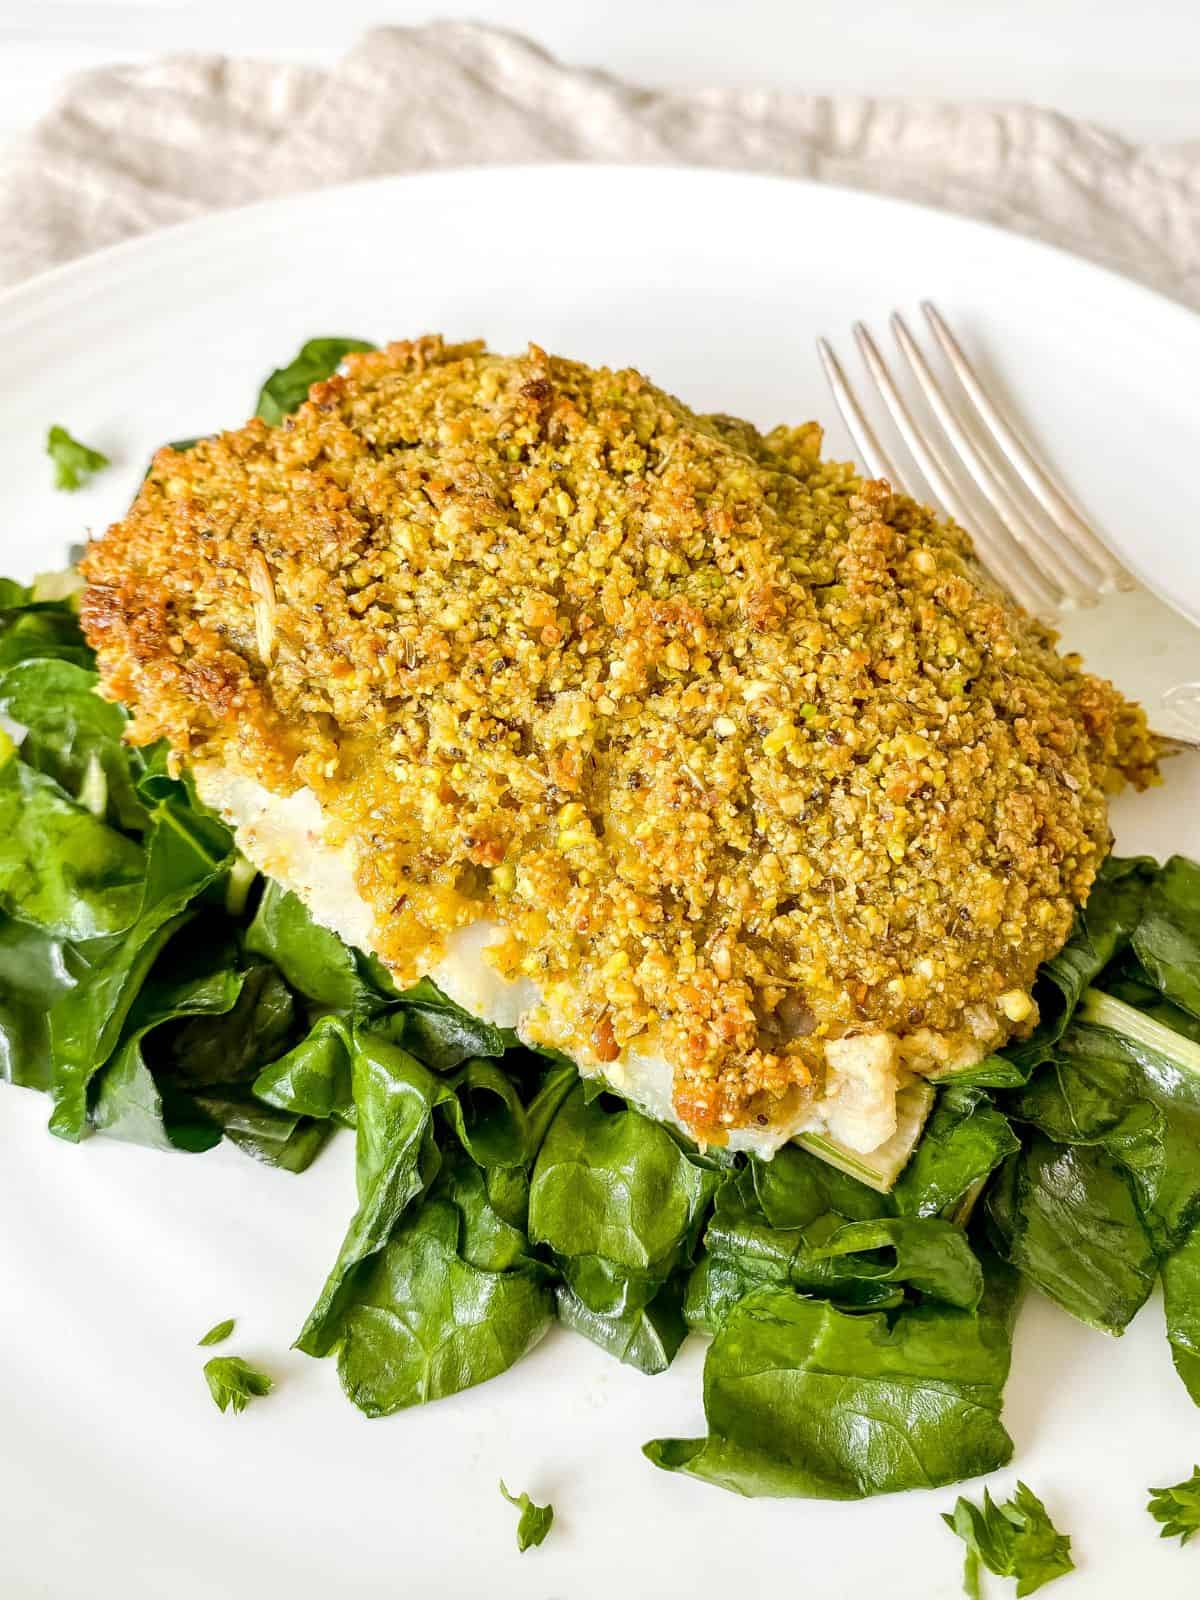 pistachio crusted cod on a bed of chard on a white plate next to a fork.